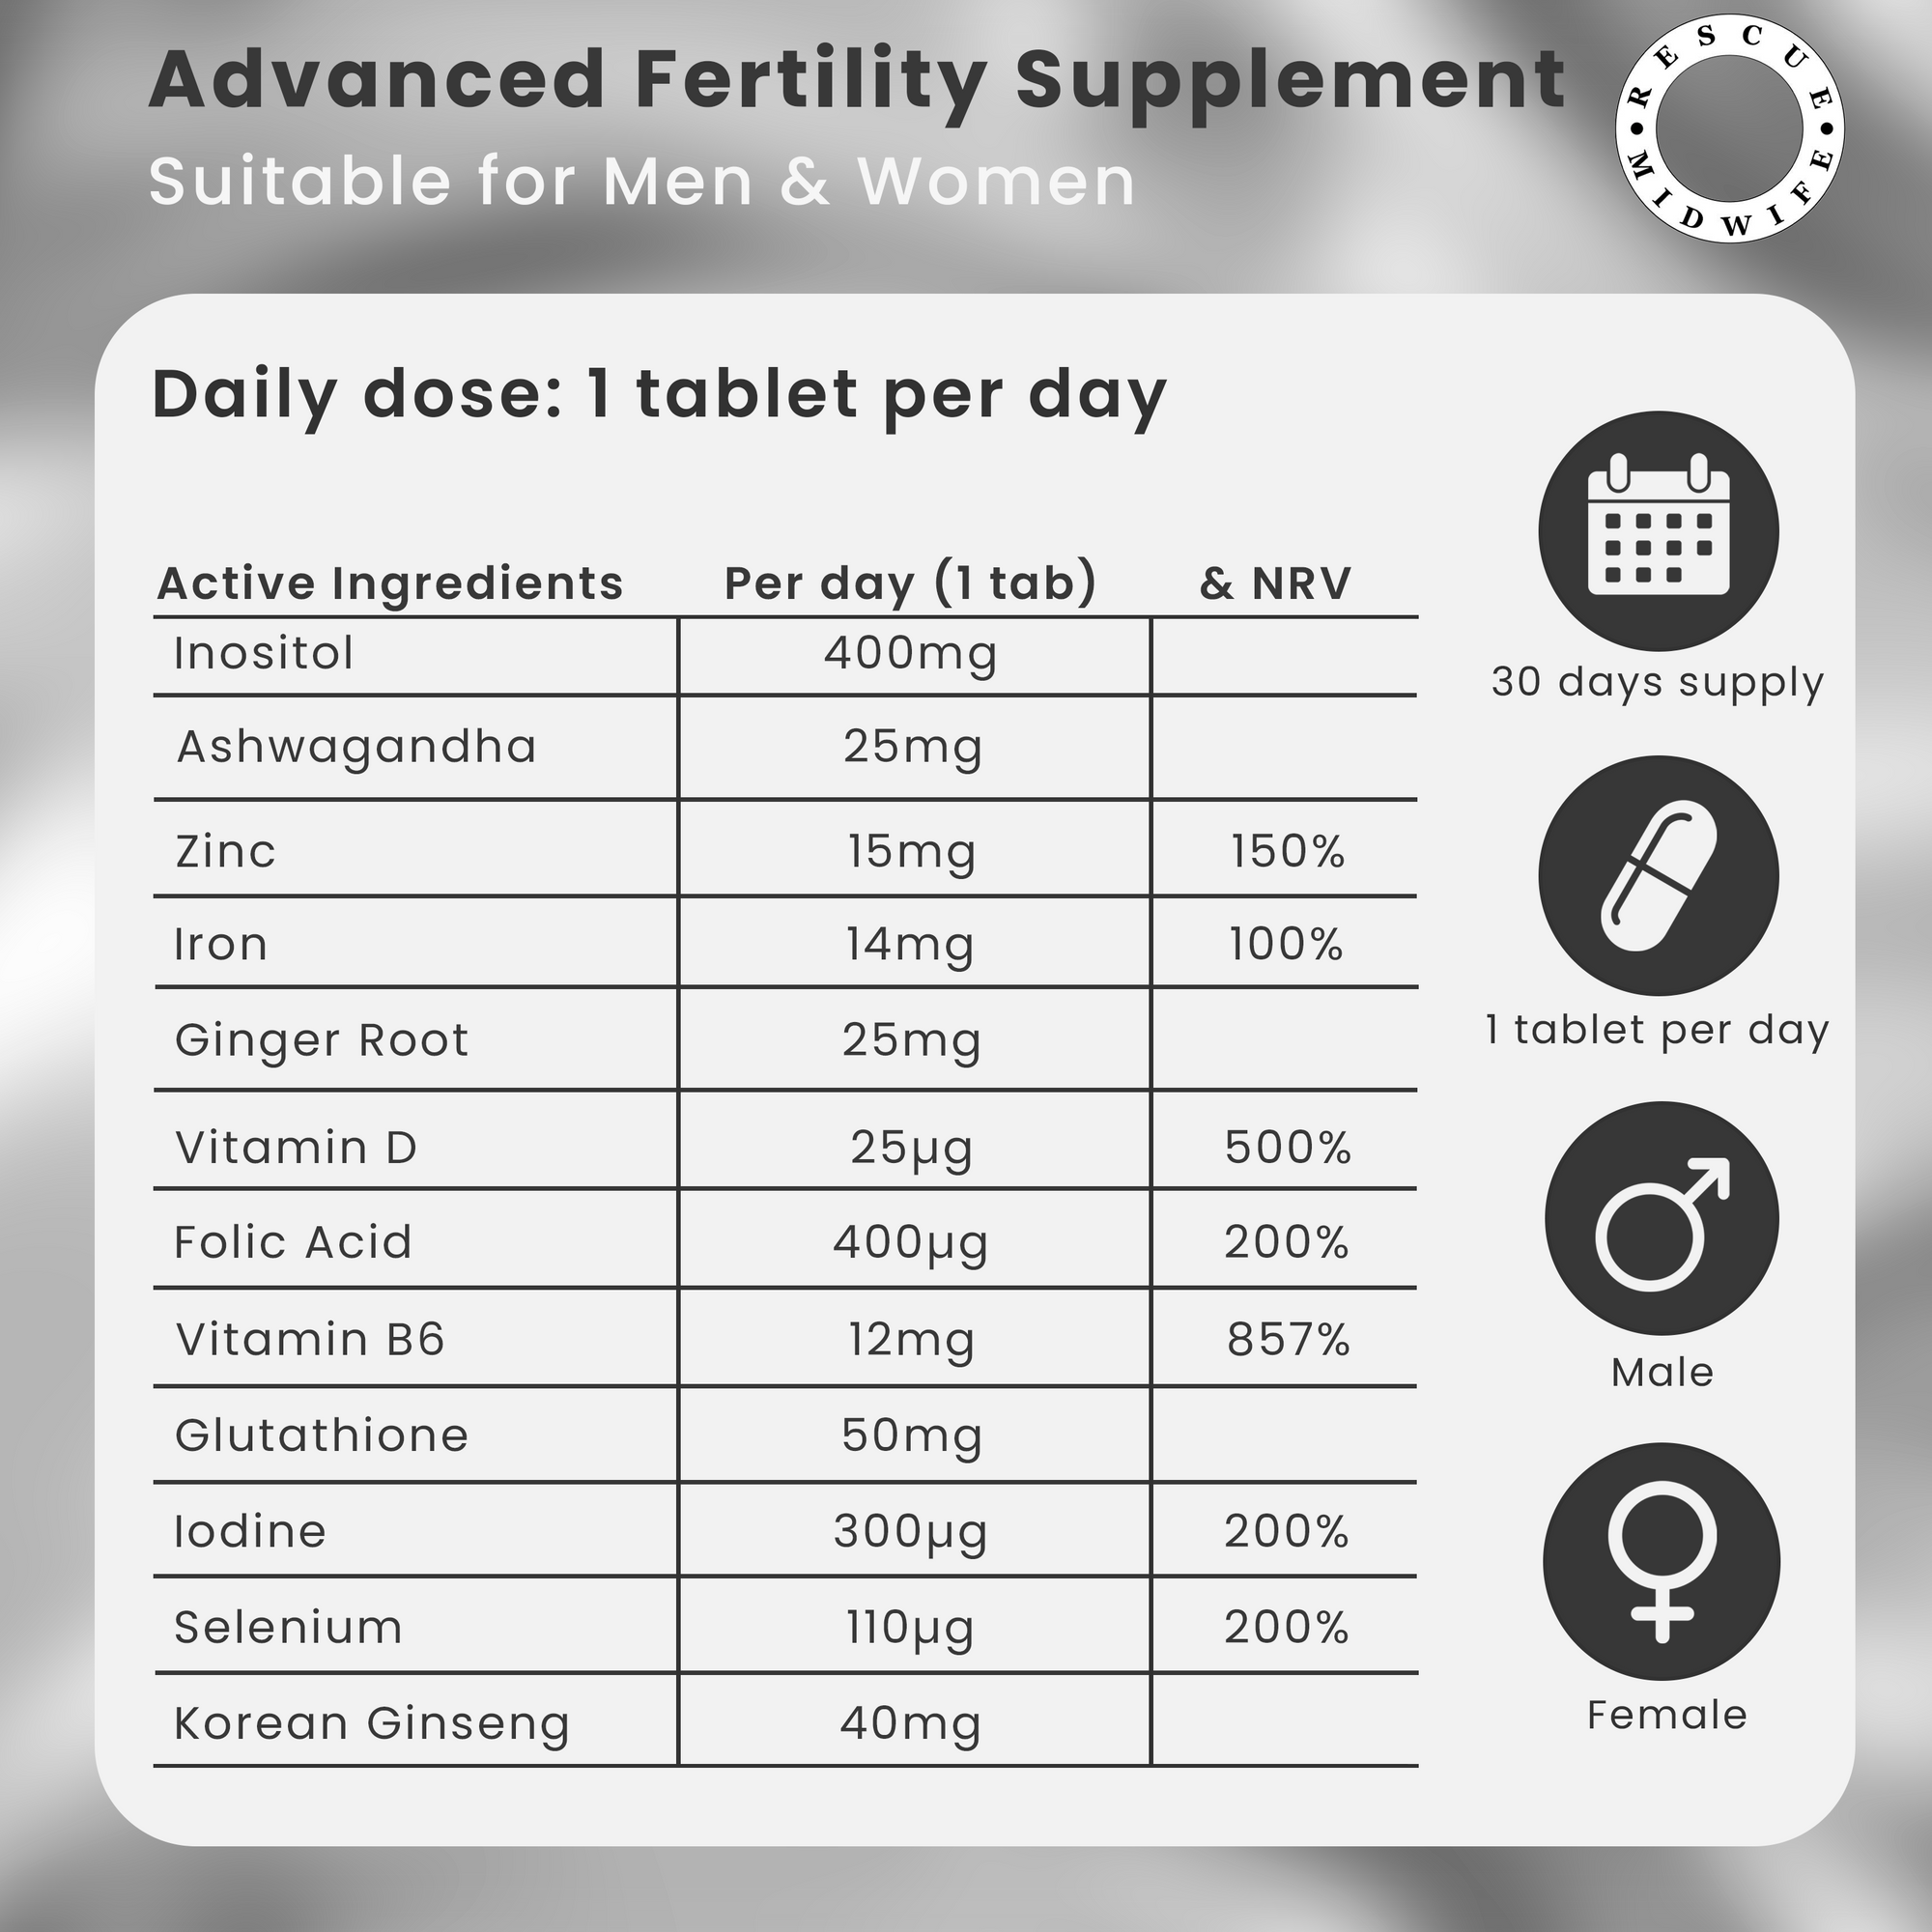 Fertility Supplement -  3 MONTH SUPPLY FOR 1 PERSON